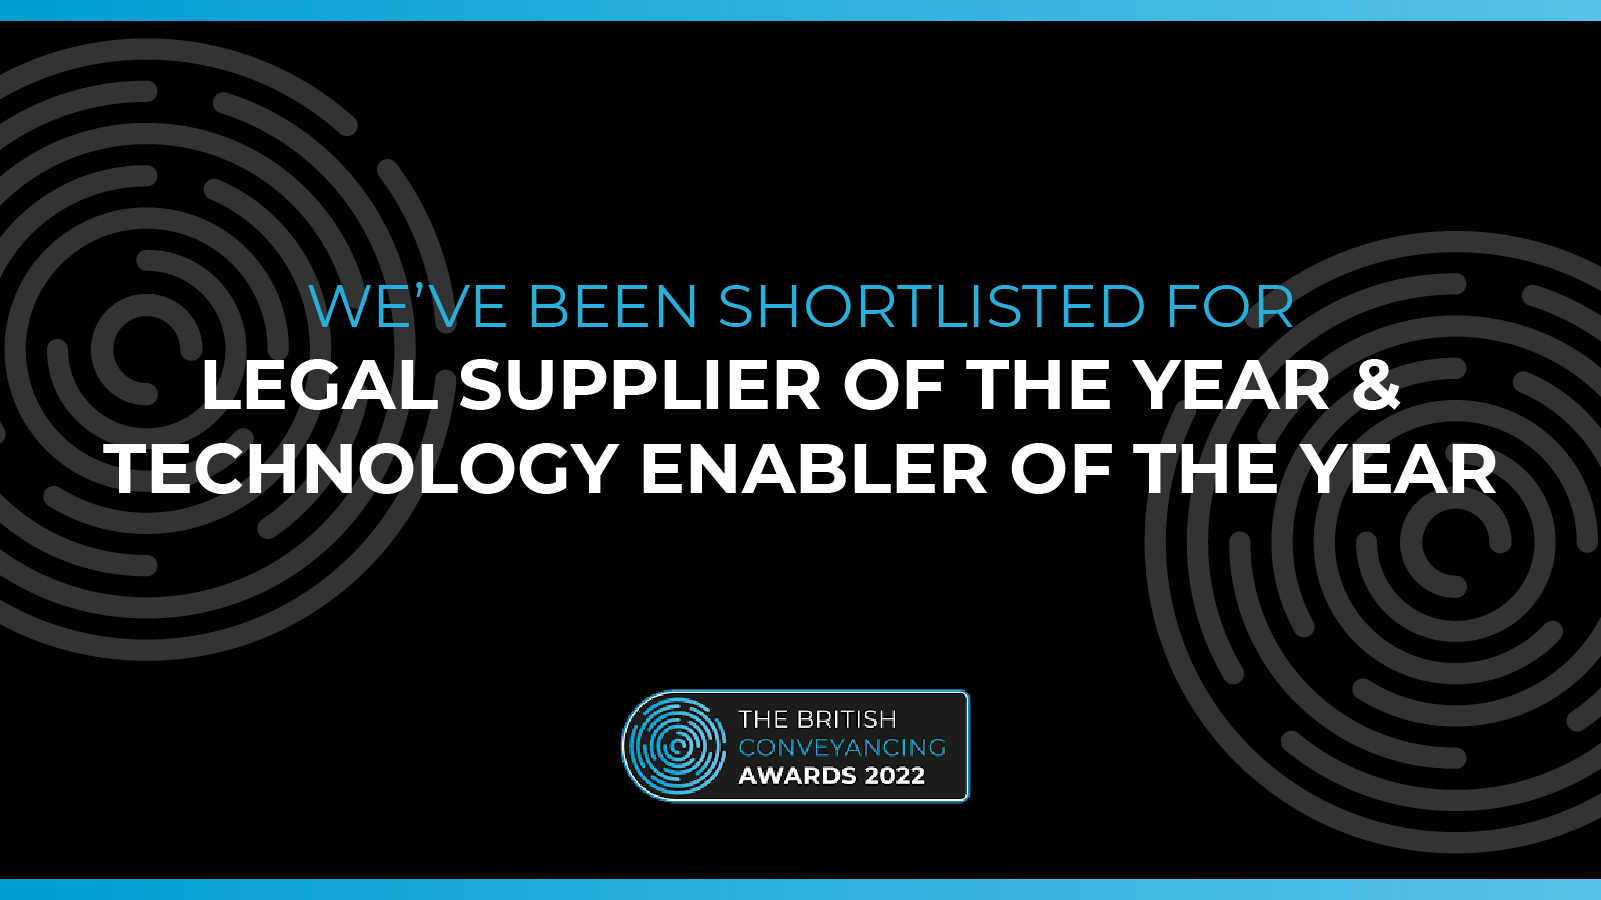 We've been shortlisted for Legal Supplier of the Year and Technology Enabler of the Year